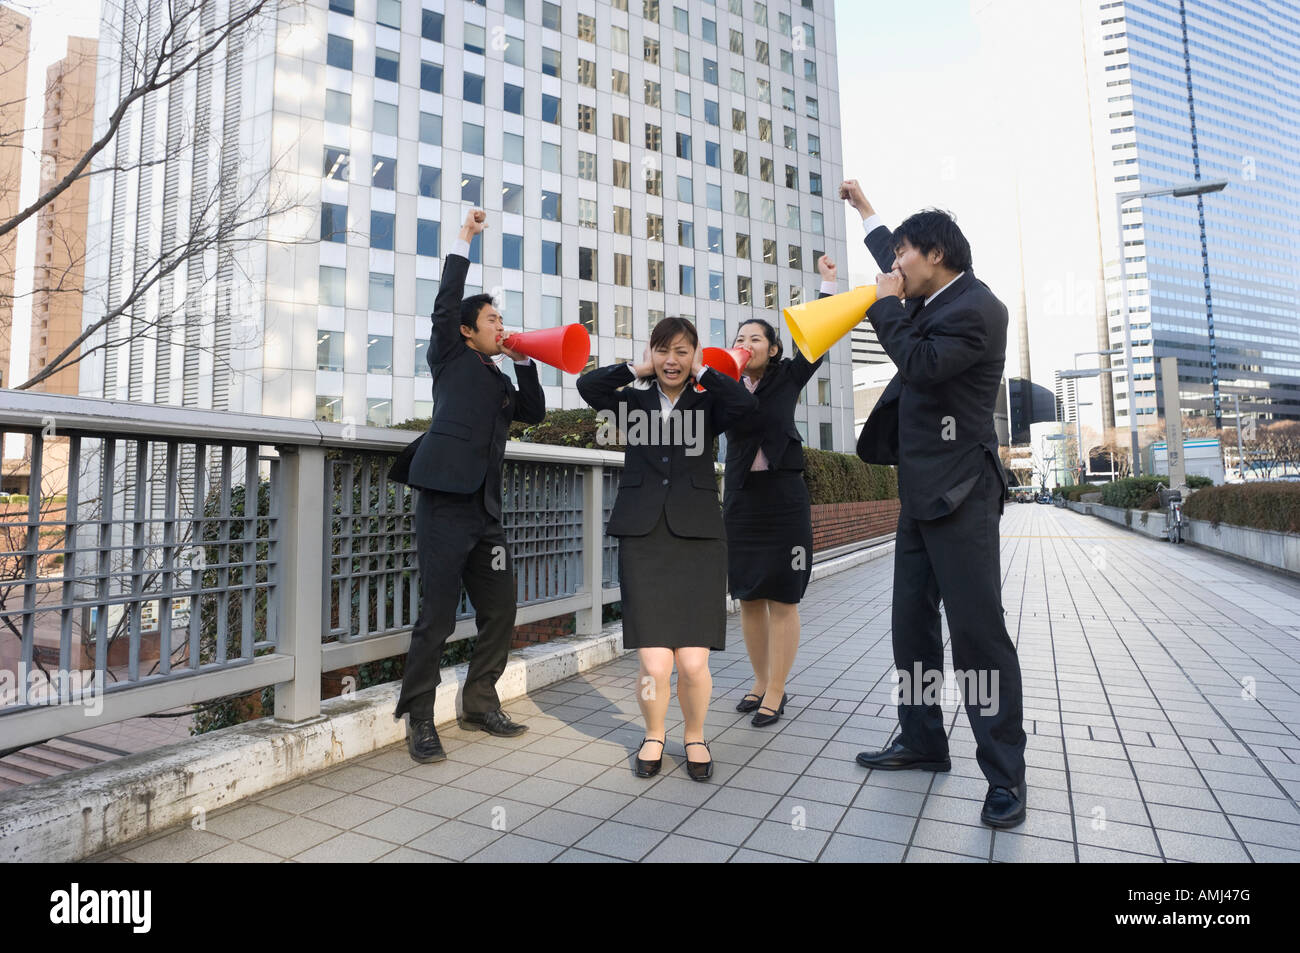 Group of business people shouting at colleague Stock Photo